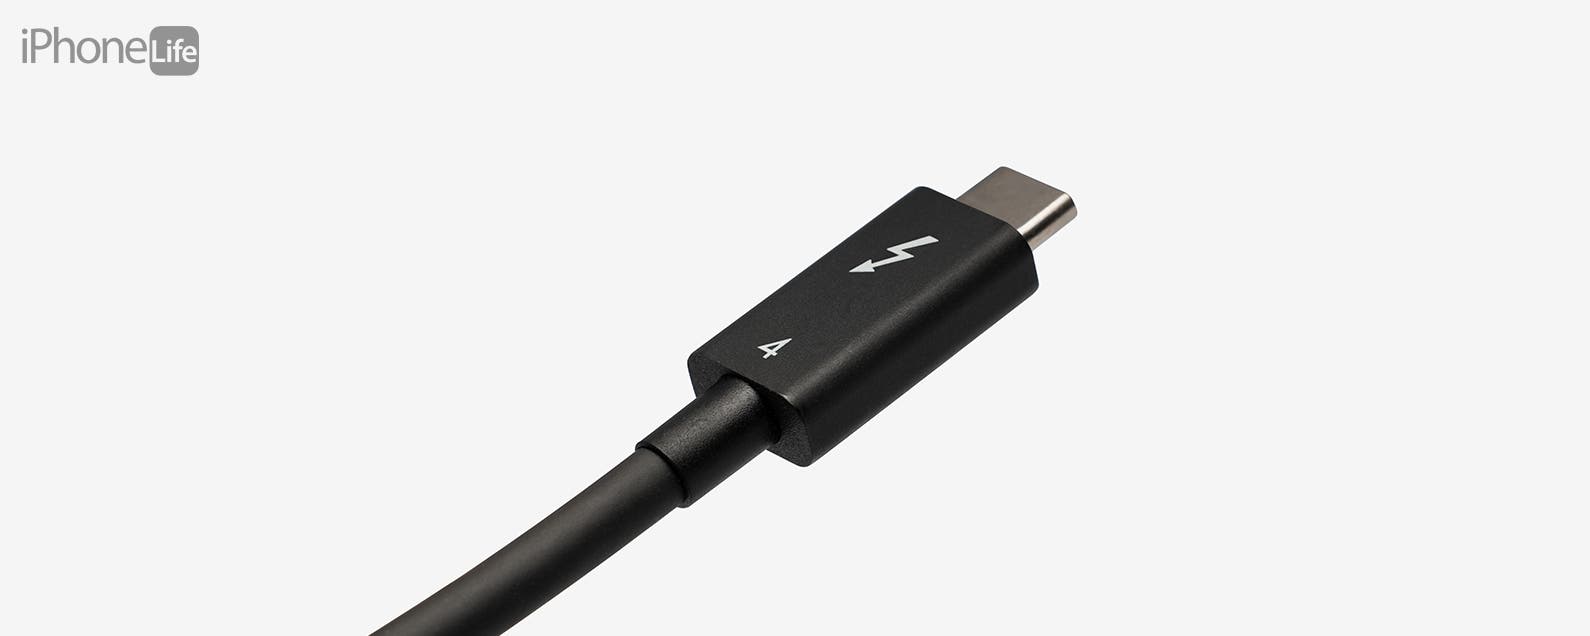 What Is Thunderbolt?